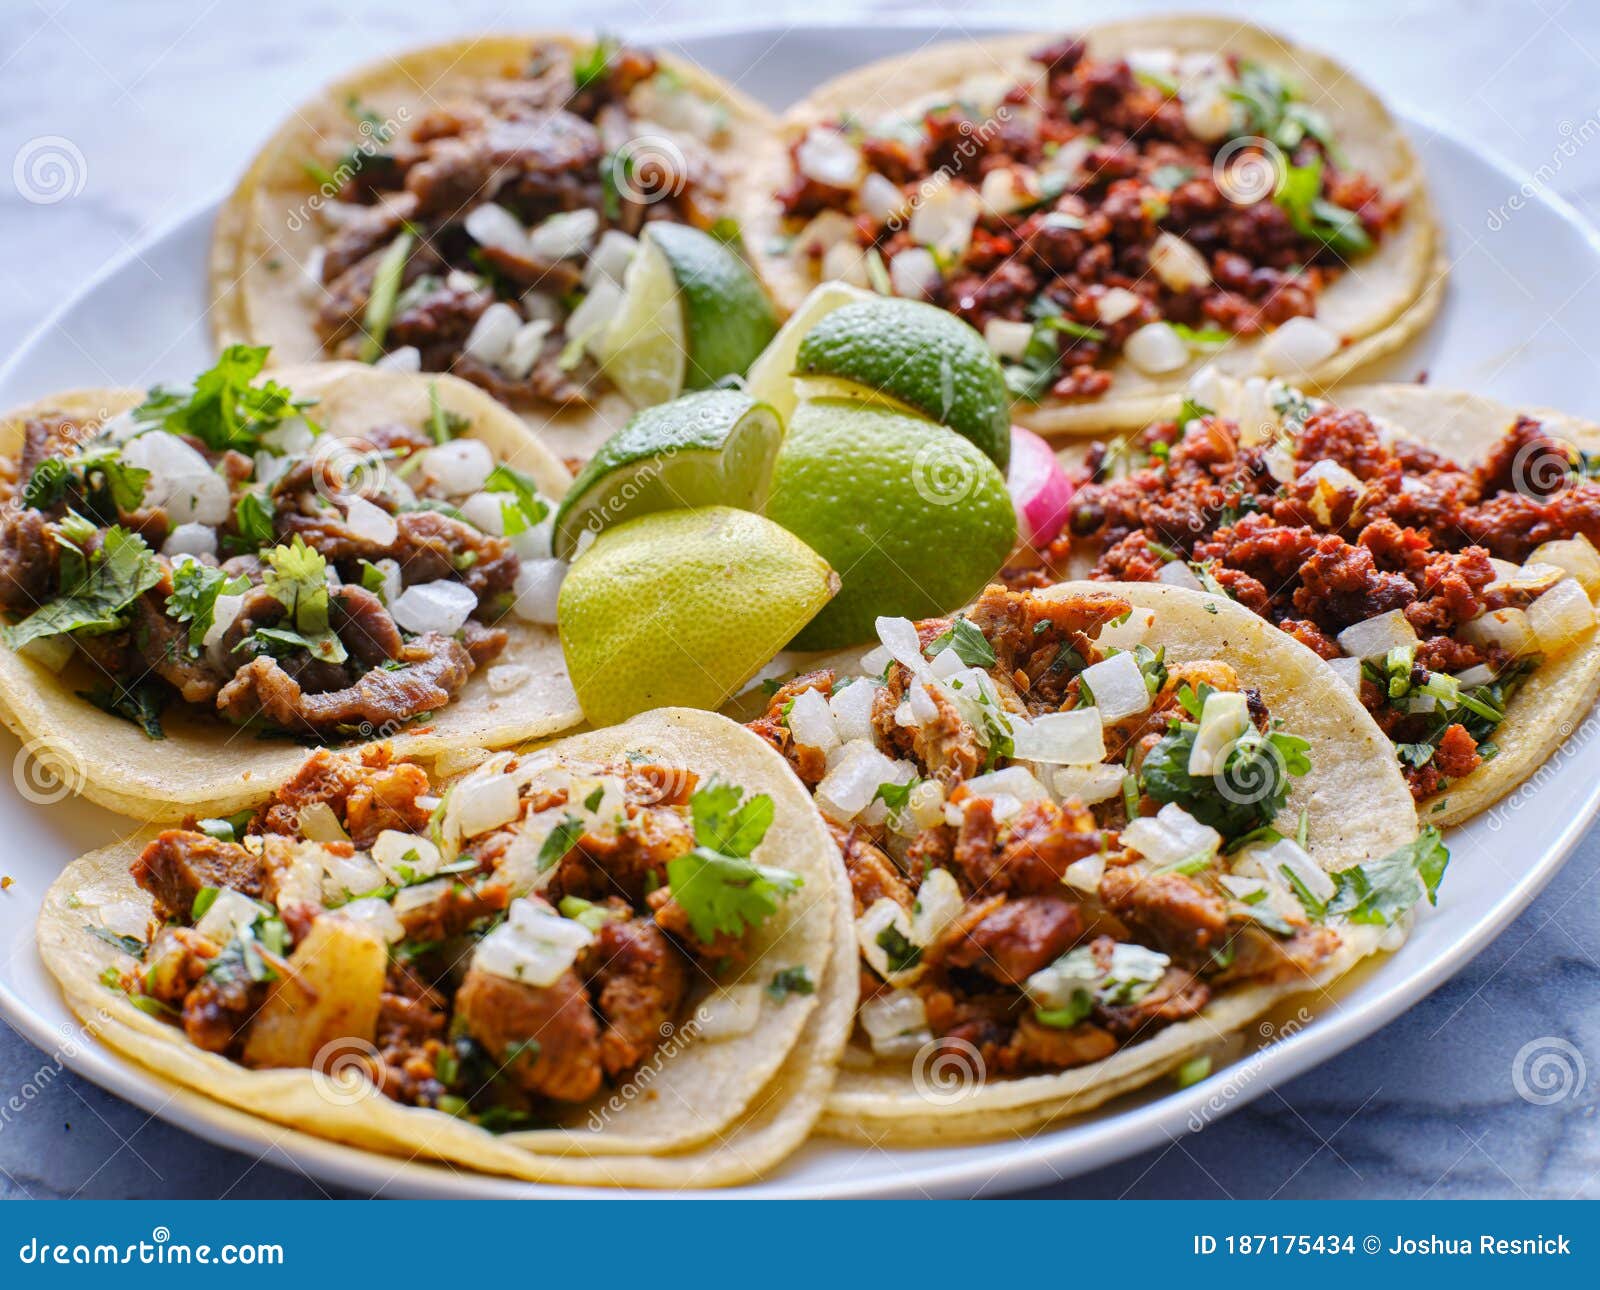 platter of mexican street tacos with carne asada, chorizo, and al pastor in corn tortillas